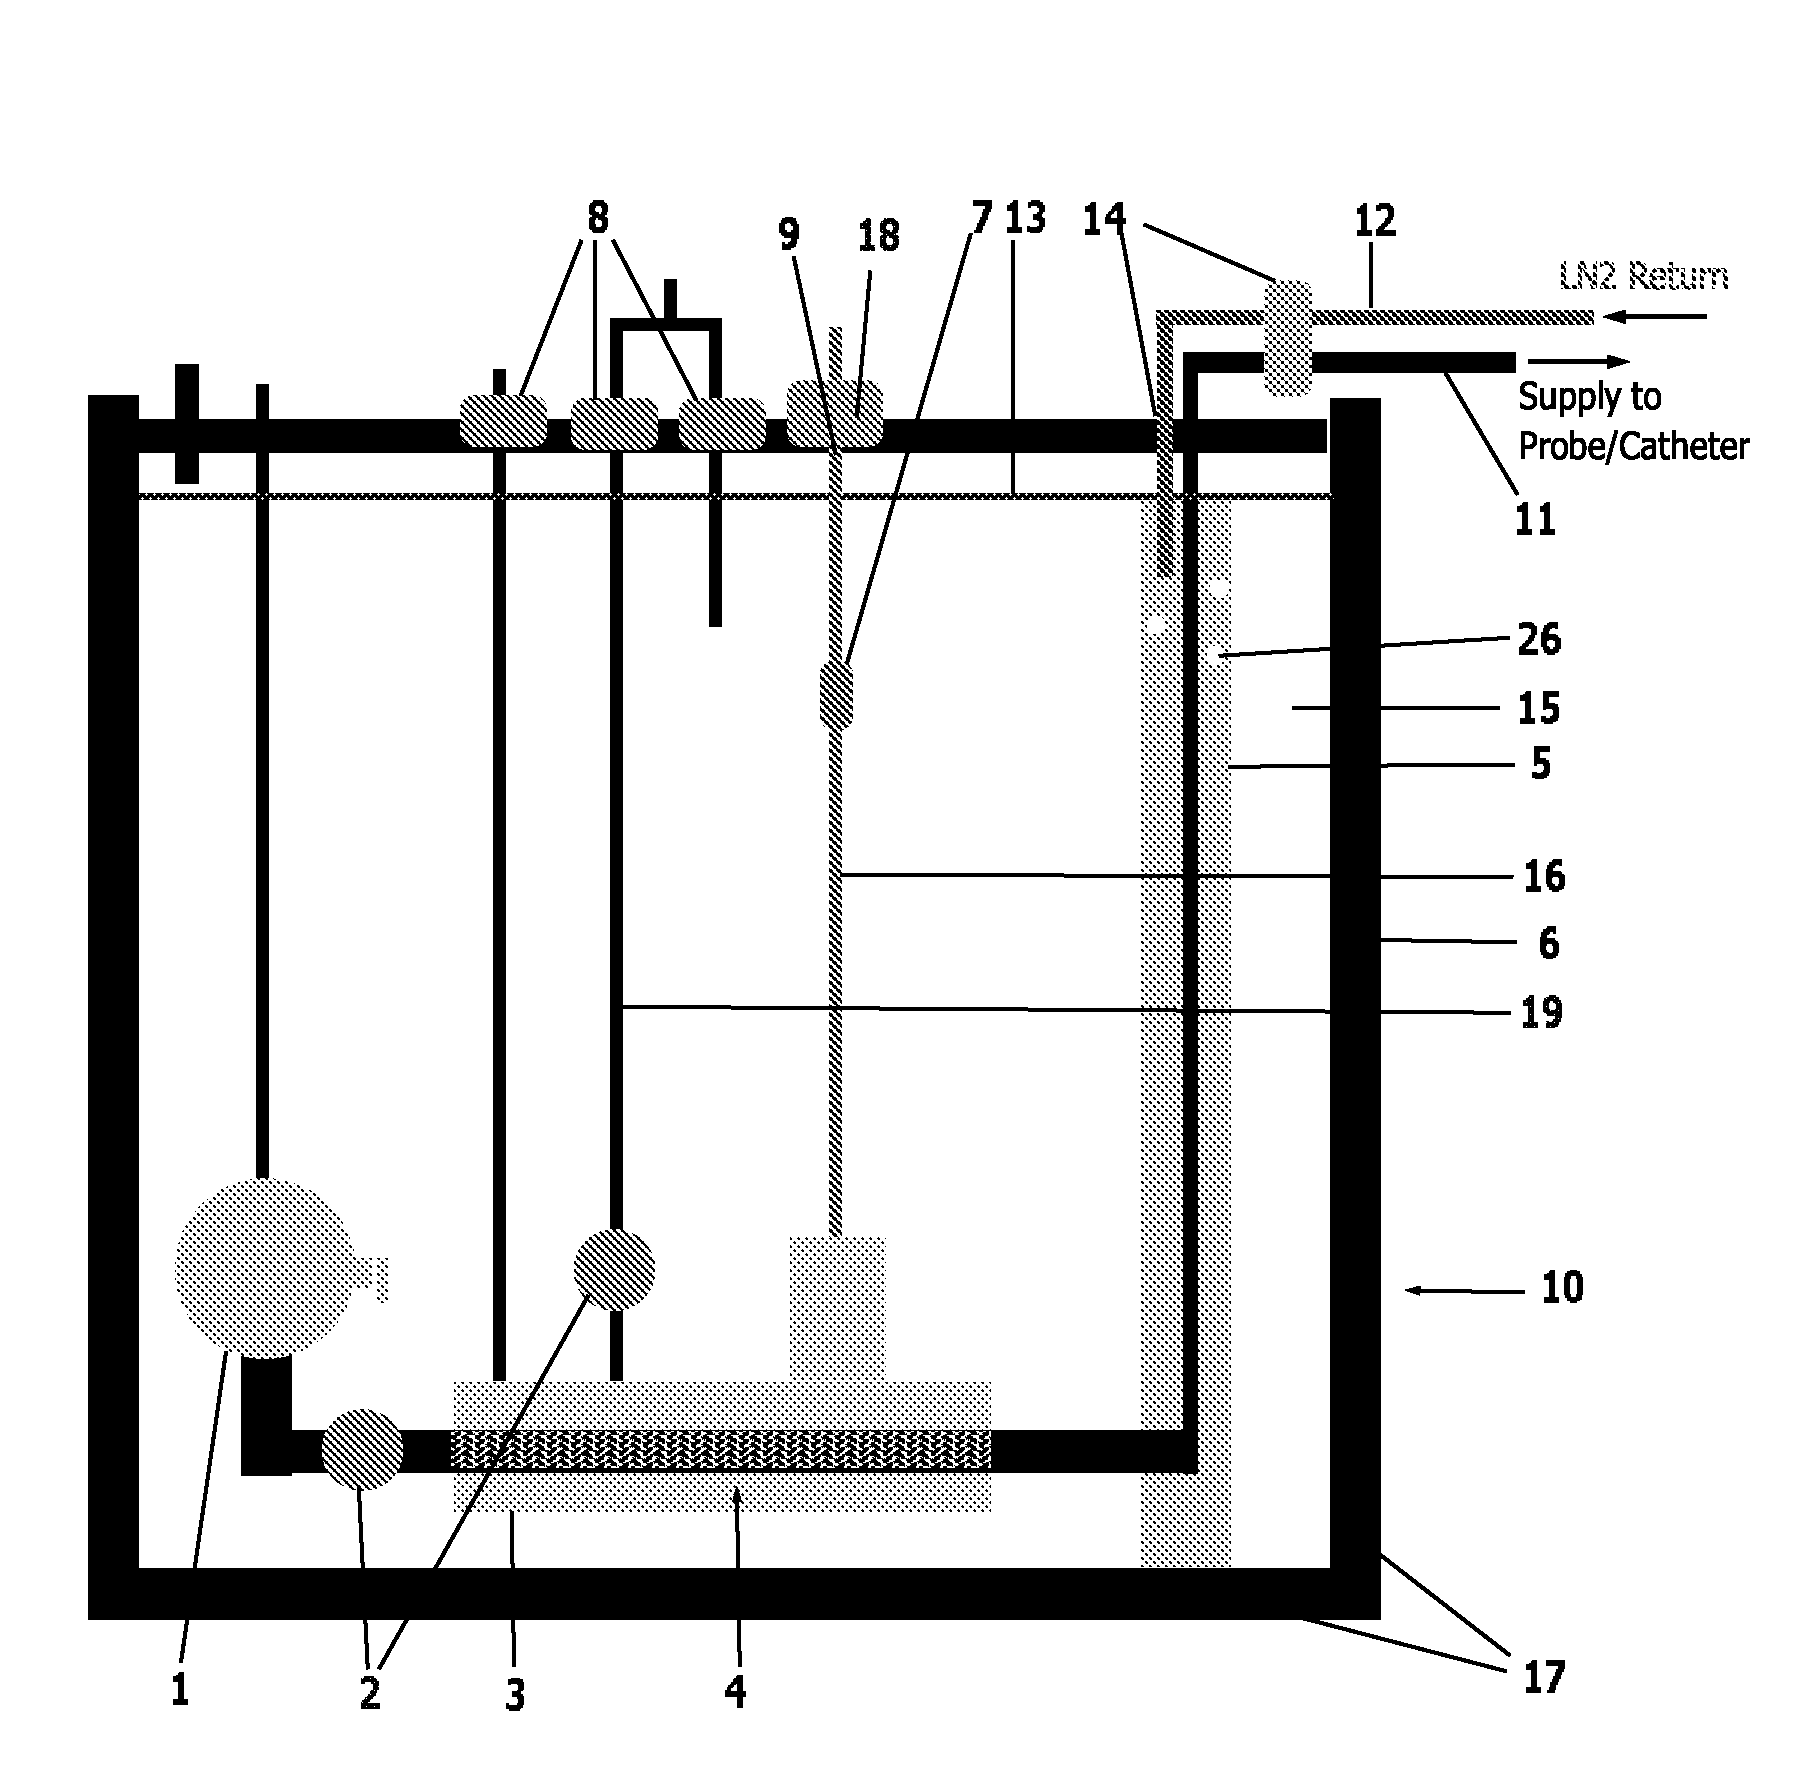 Medical Device for the Transport of Subcooled Cryogenic Fluid through a Linear Heat Exchanger